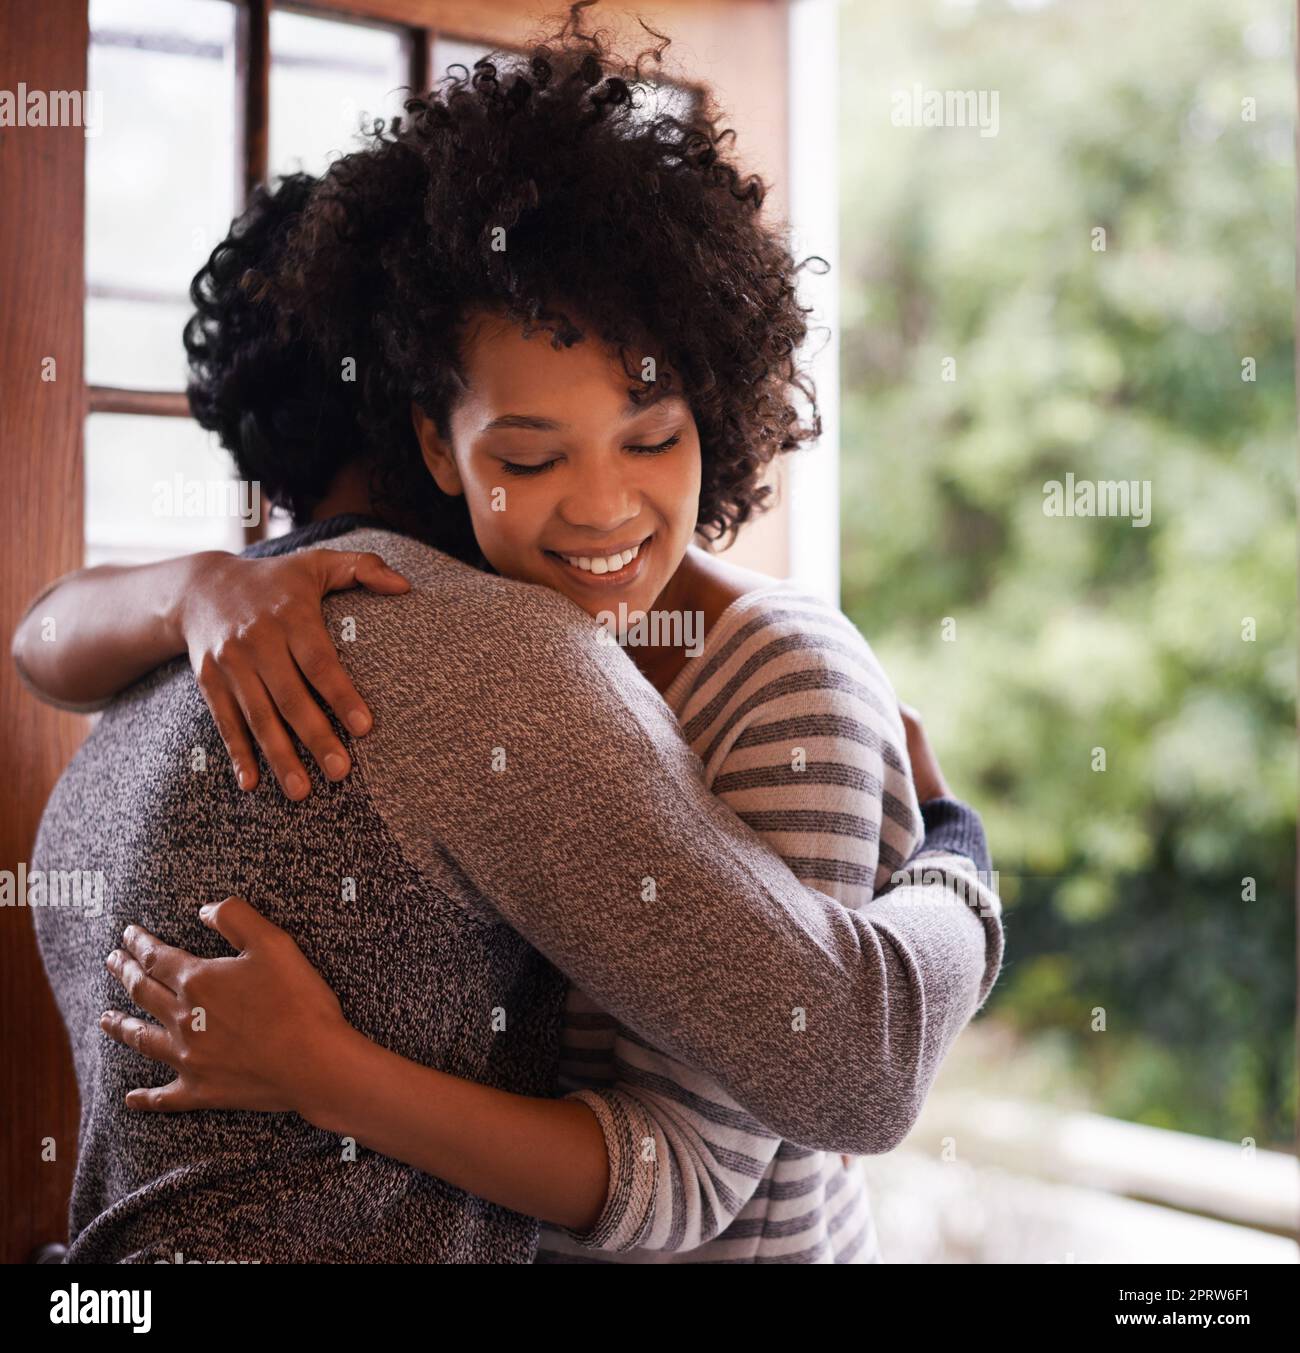 Greeting her with a warm embrace. a young woman greeting her husband at the door. Stock Photo